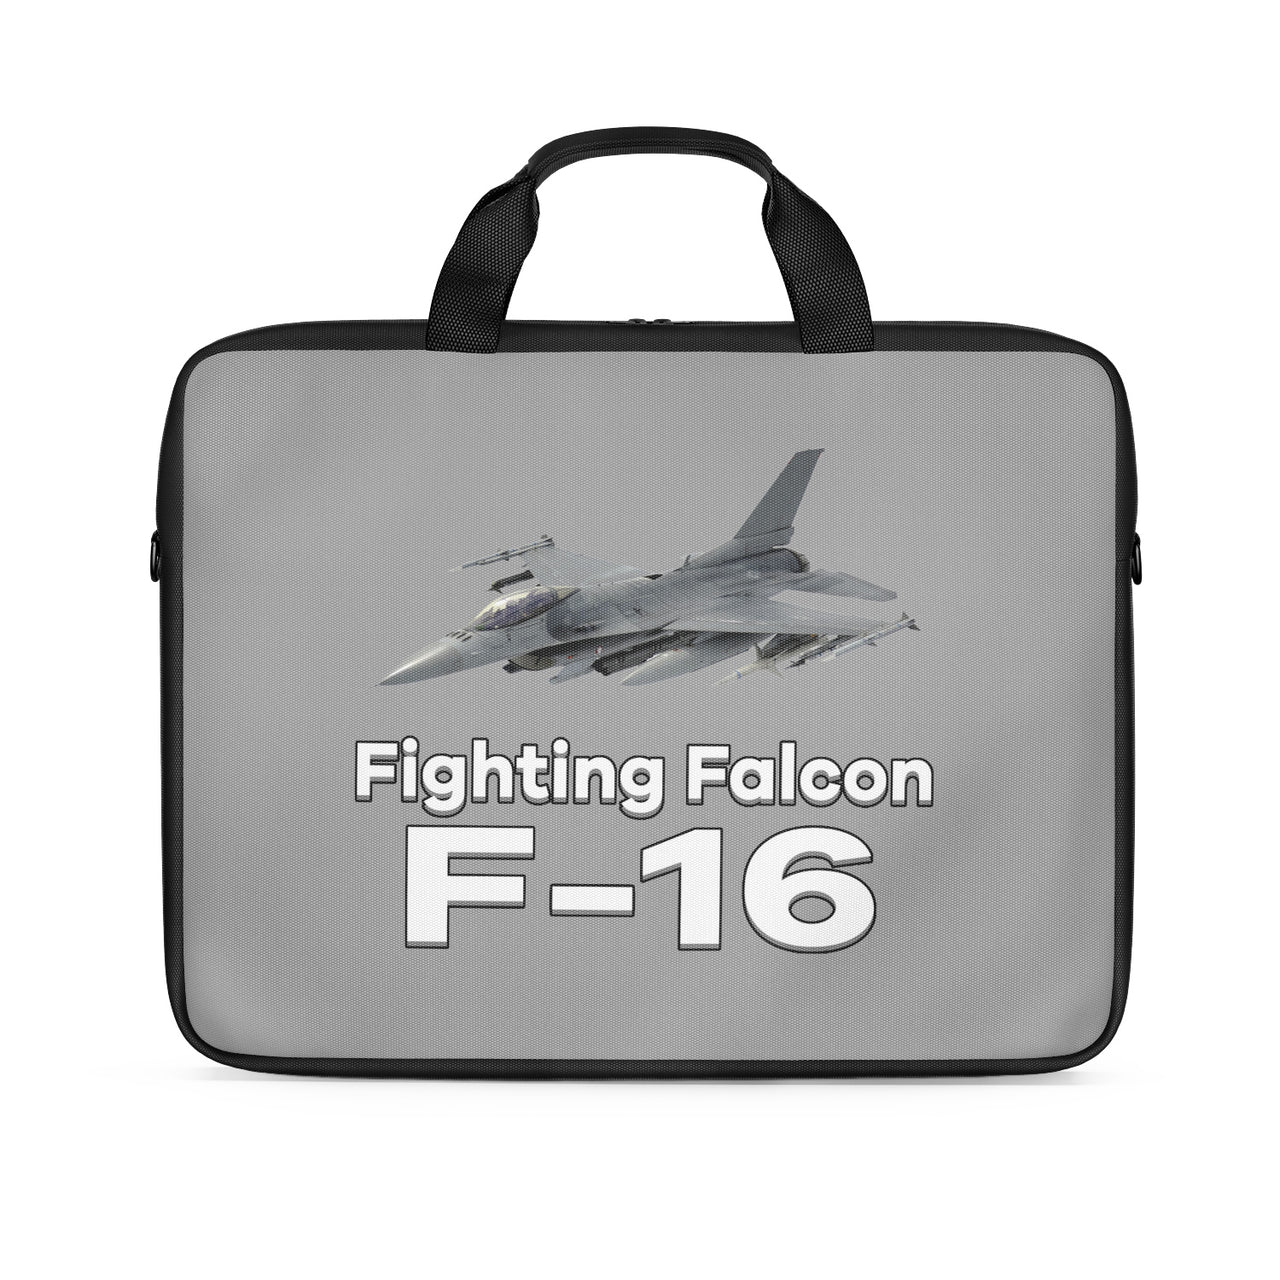 The Fighting Falcon F16 Designed Laptop & Tablet Bags